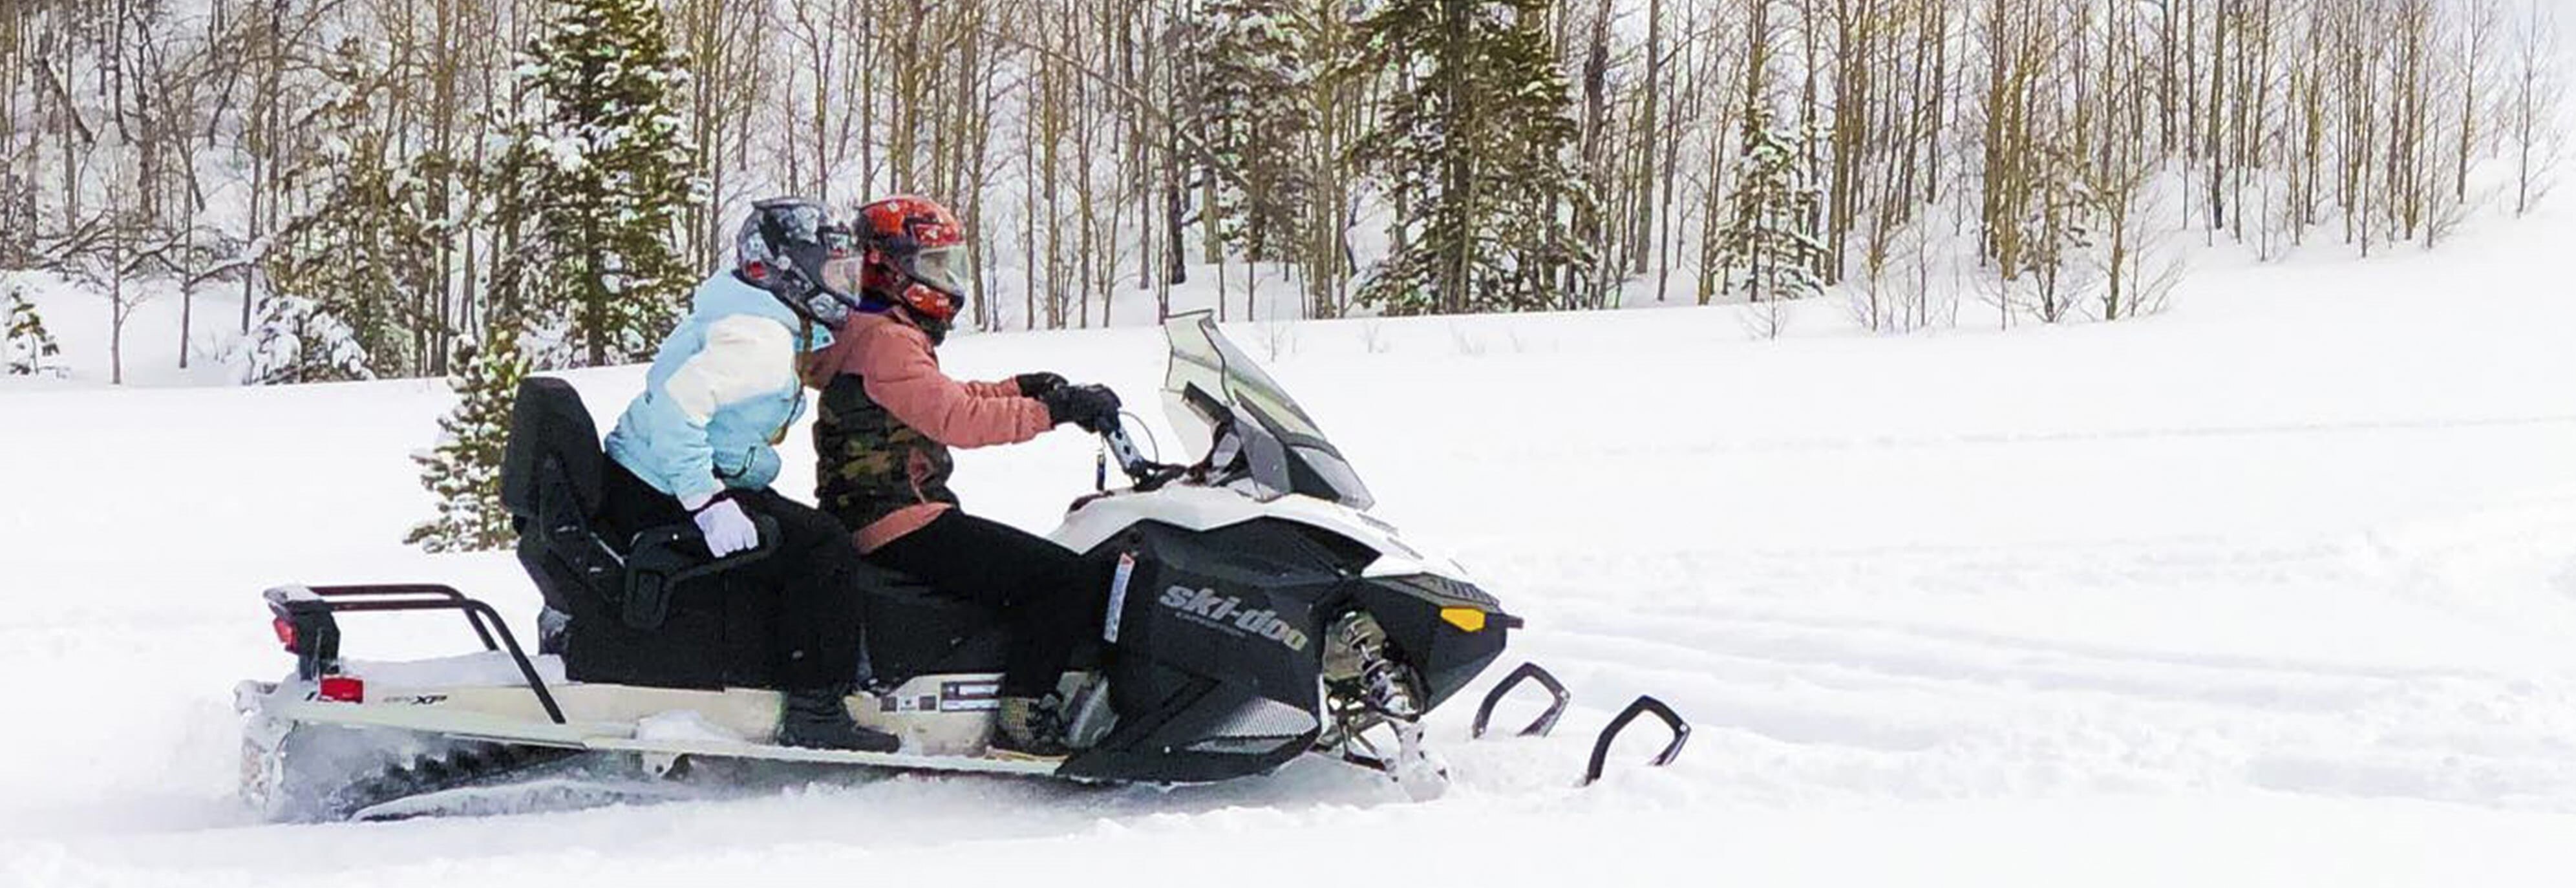 Ski-Doo riders on their sled driving by